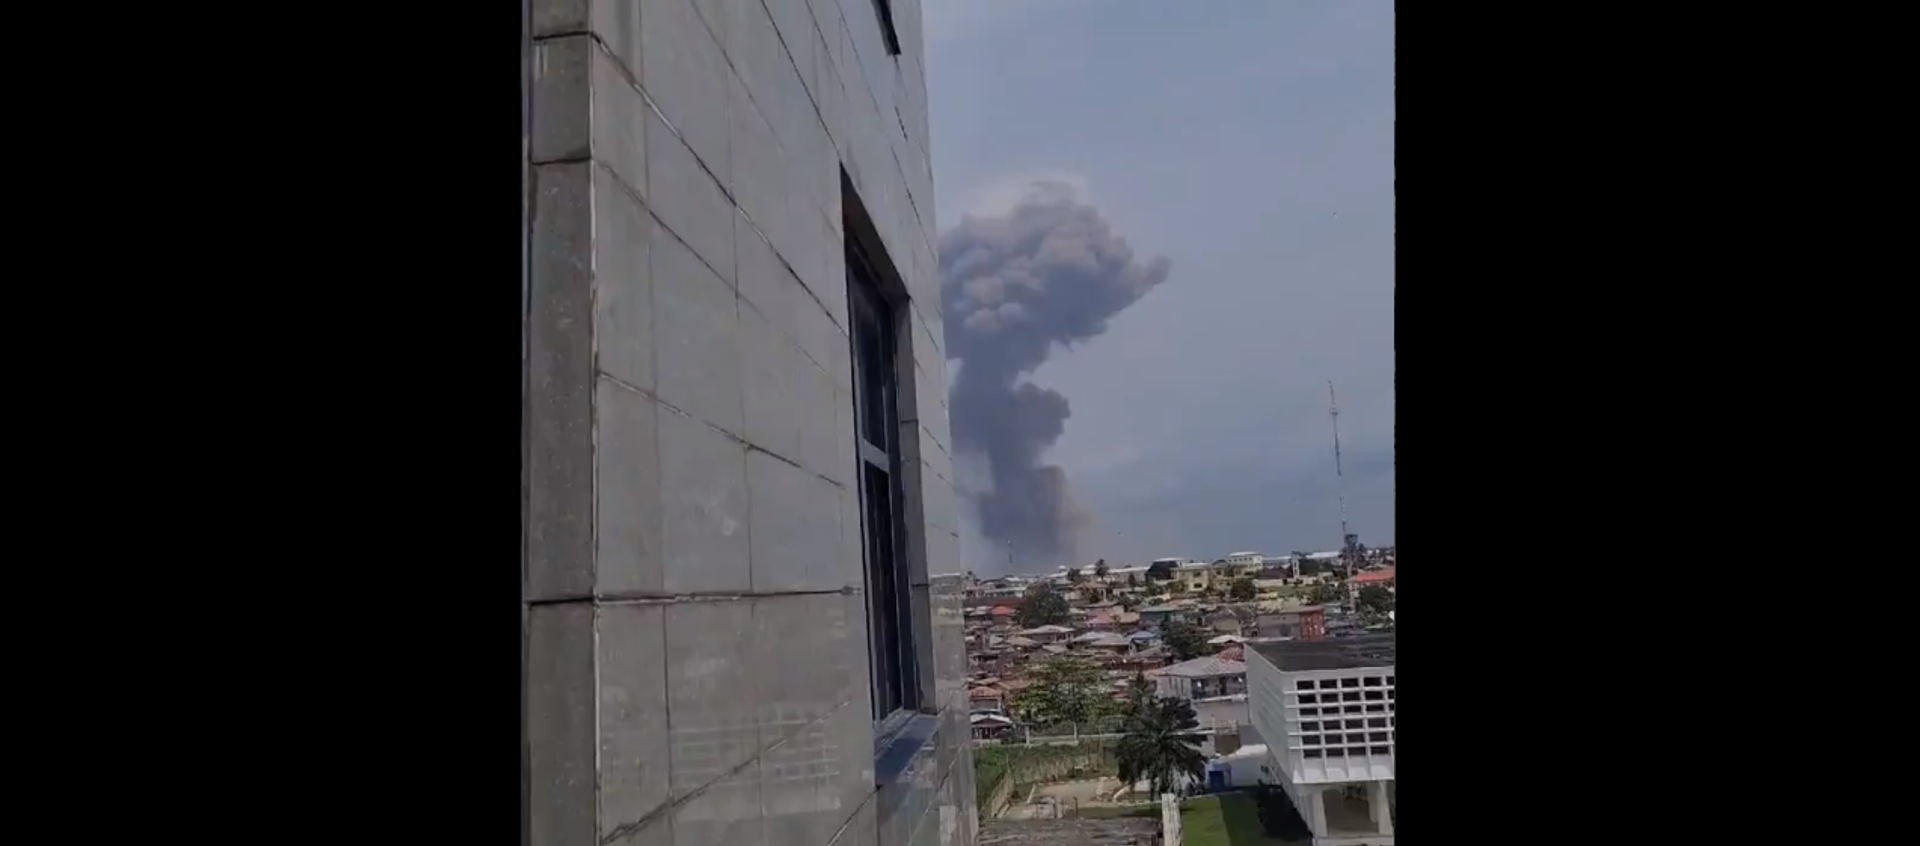 A screenshot from the video allegedly showing the smoke coming from the site of the explosion in Ecuatorial Guinea's city of Bata, posted on Twitter on March 7, 2021 - Sputnik International, 1920, 07.03.2021